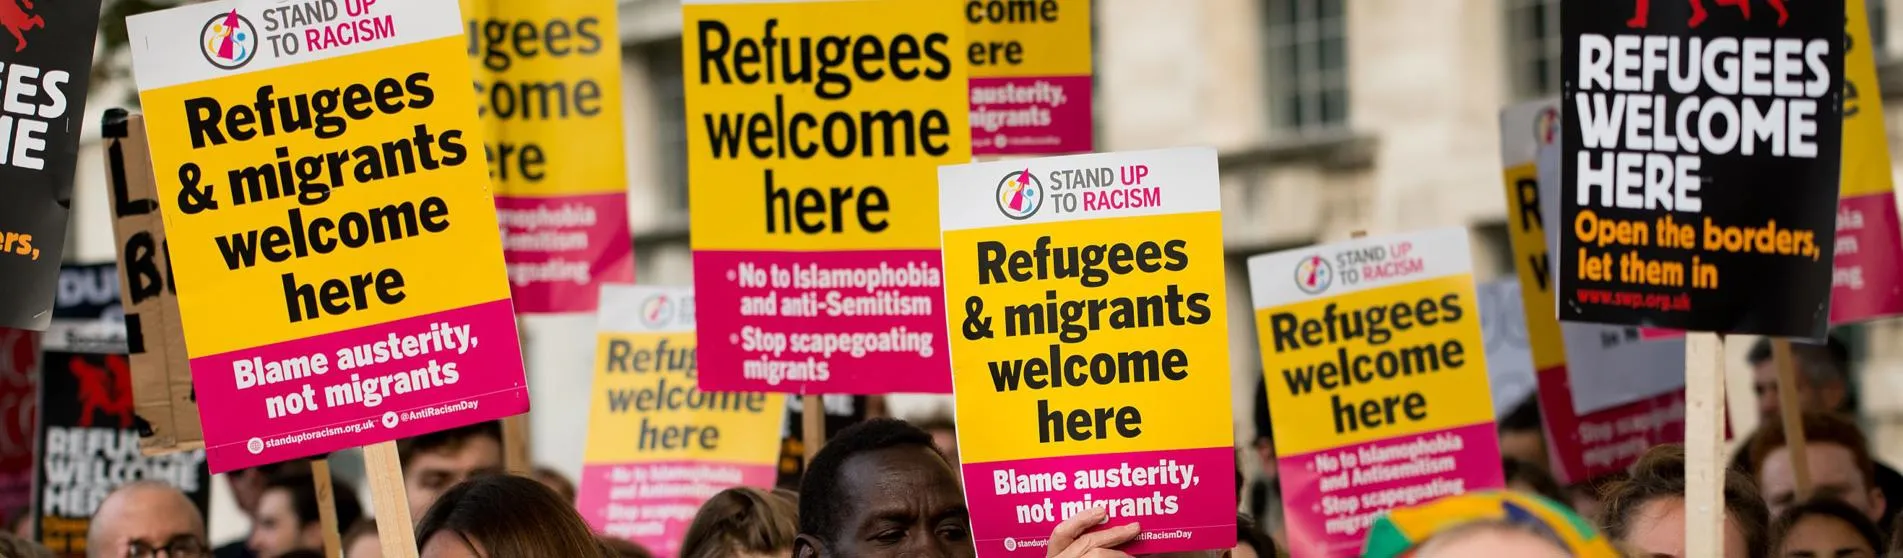 People at refugee protest holding 'refugees & migrants welcome here' signs